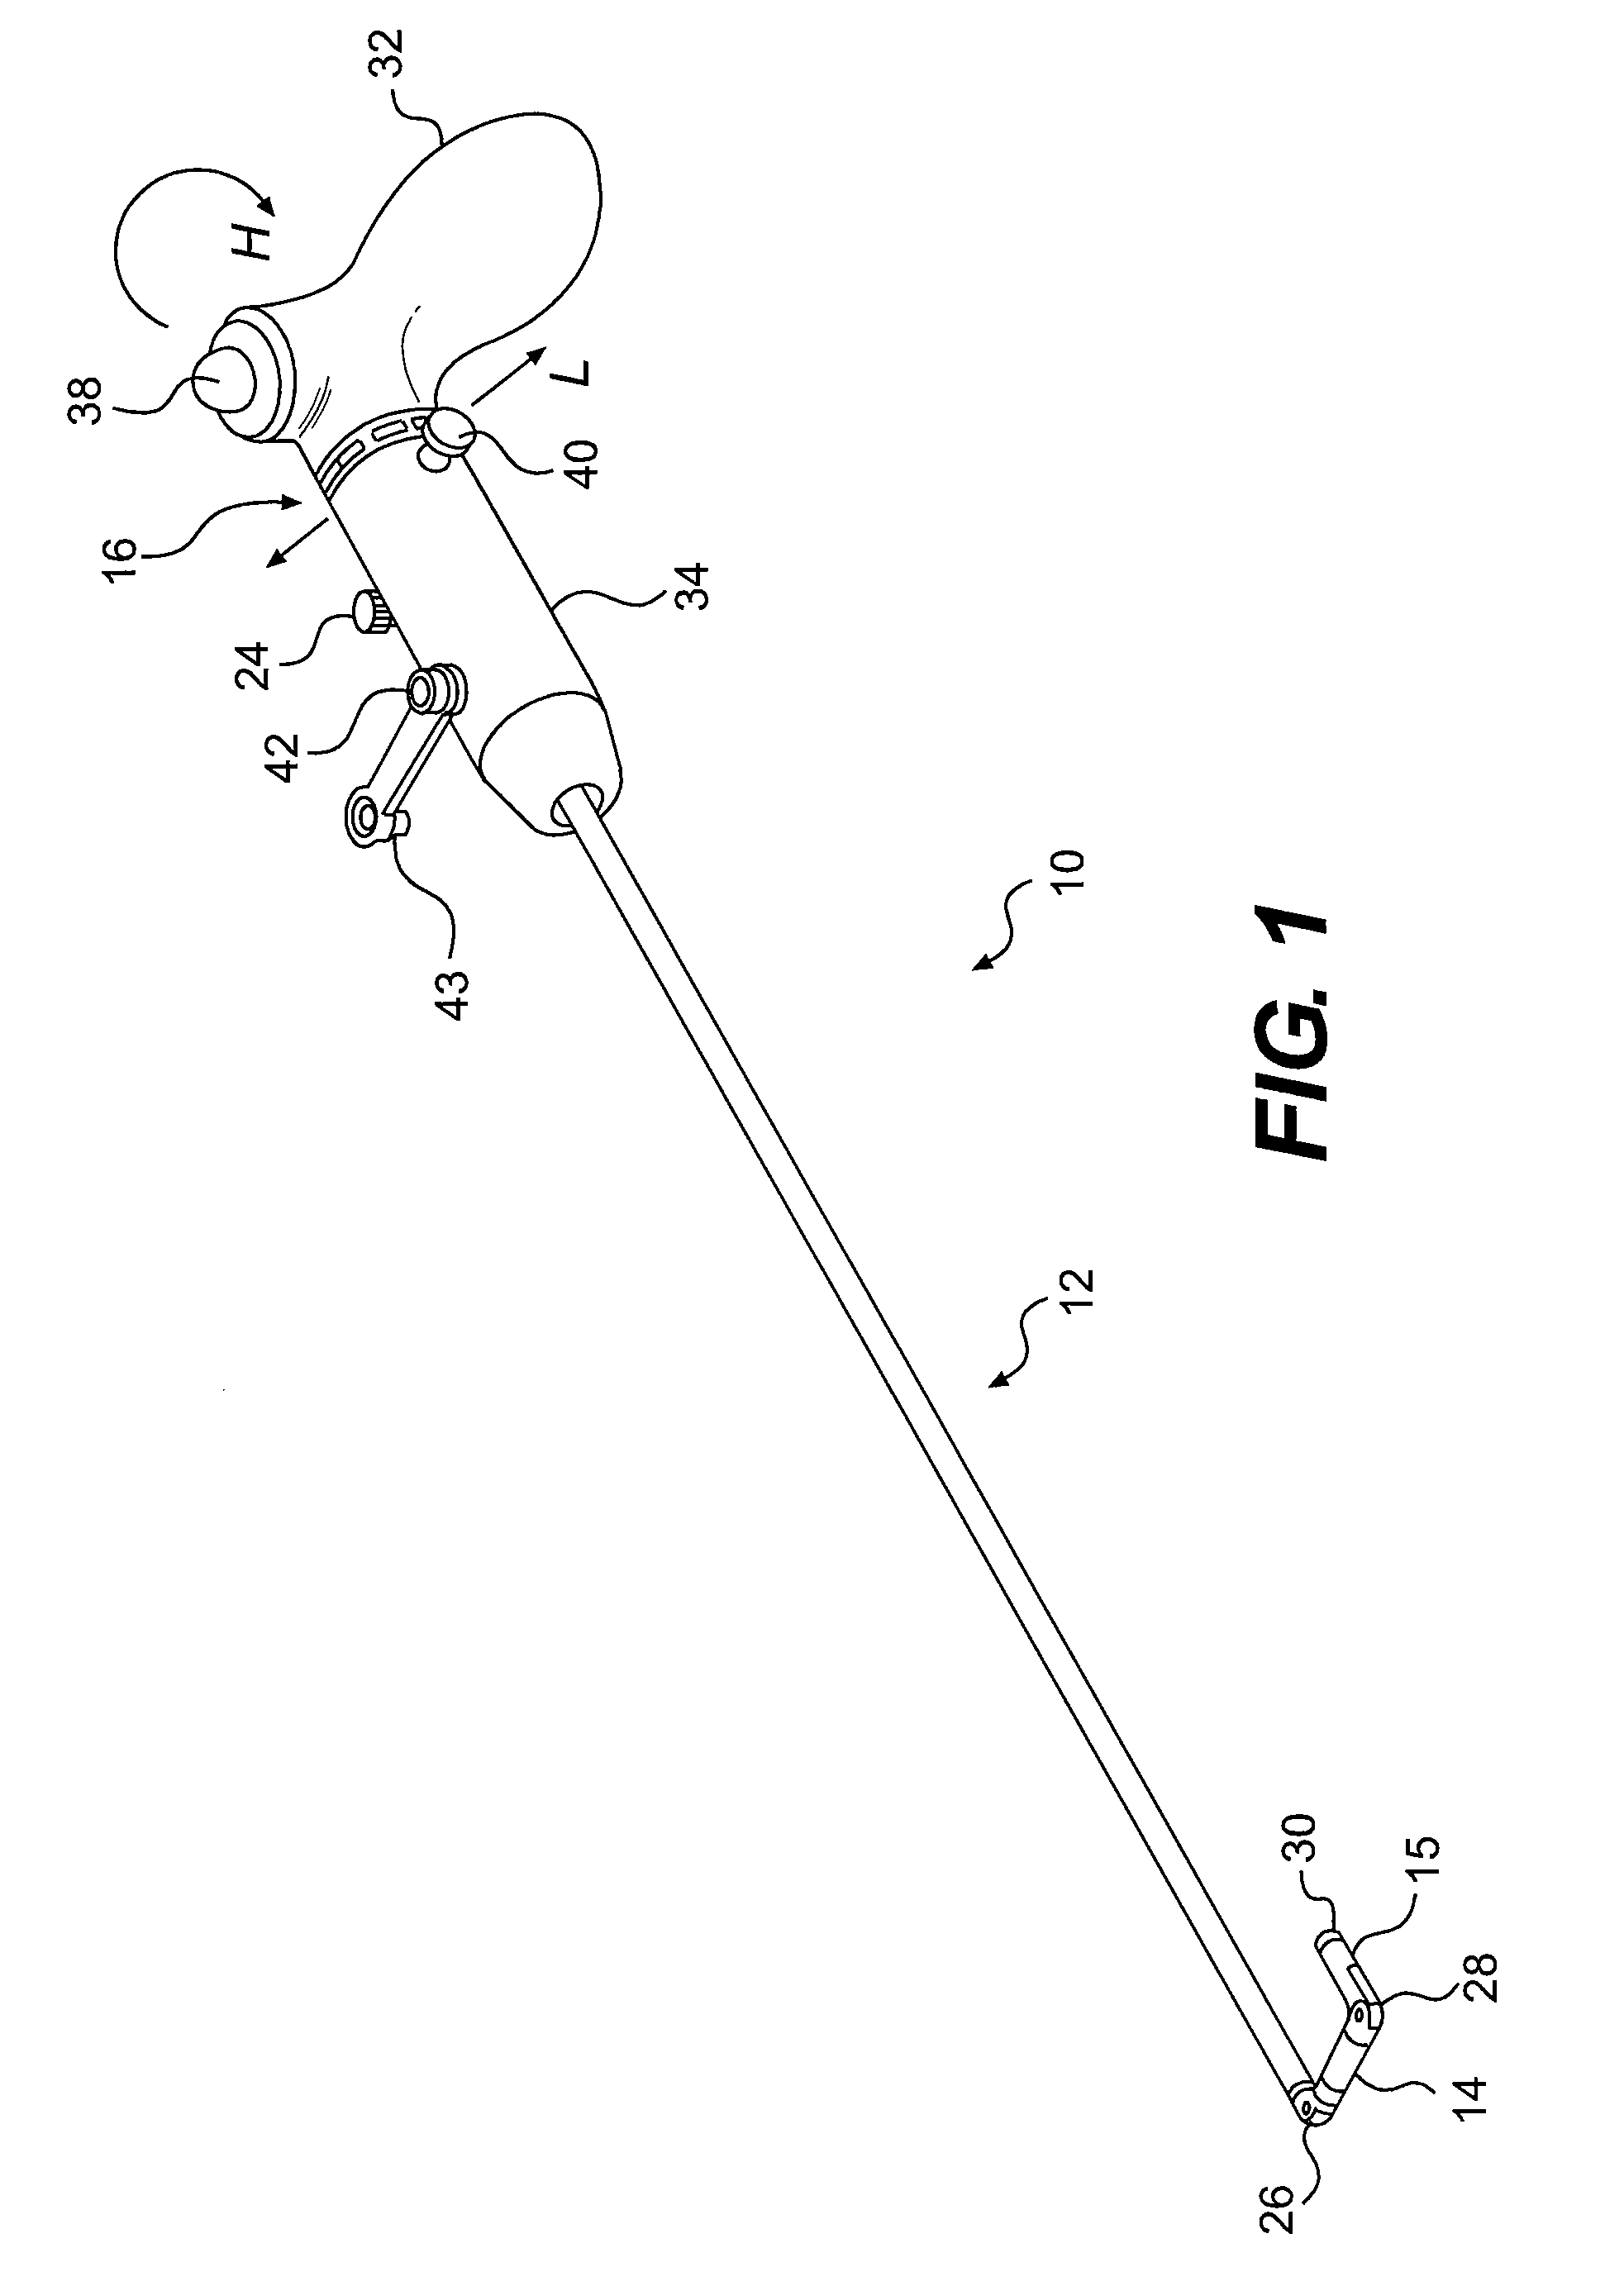 Articulable surgical instrument